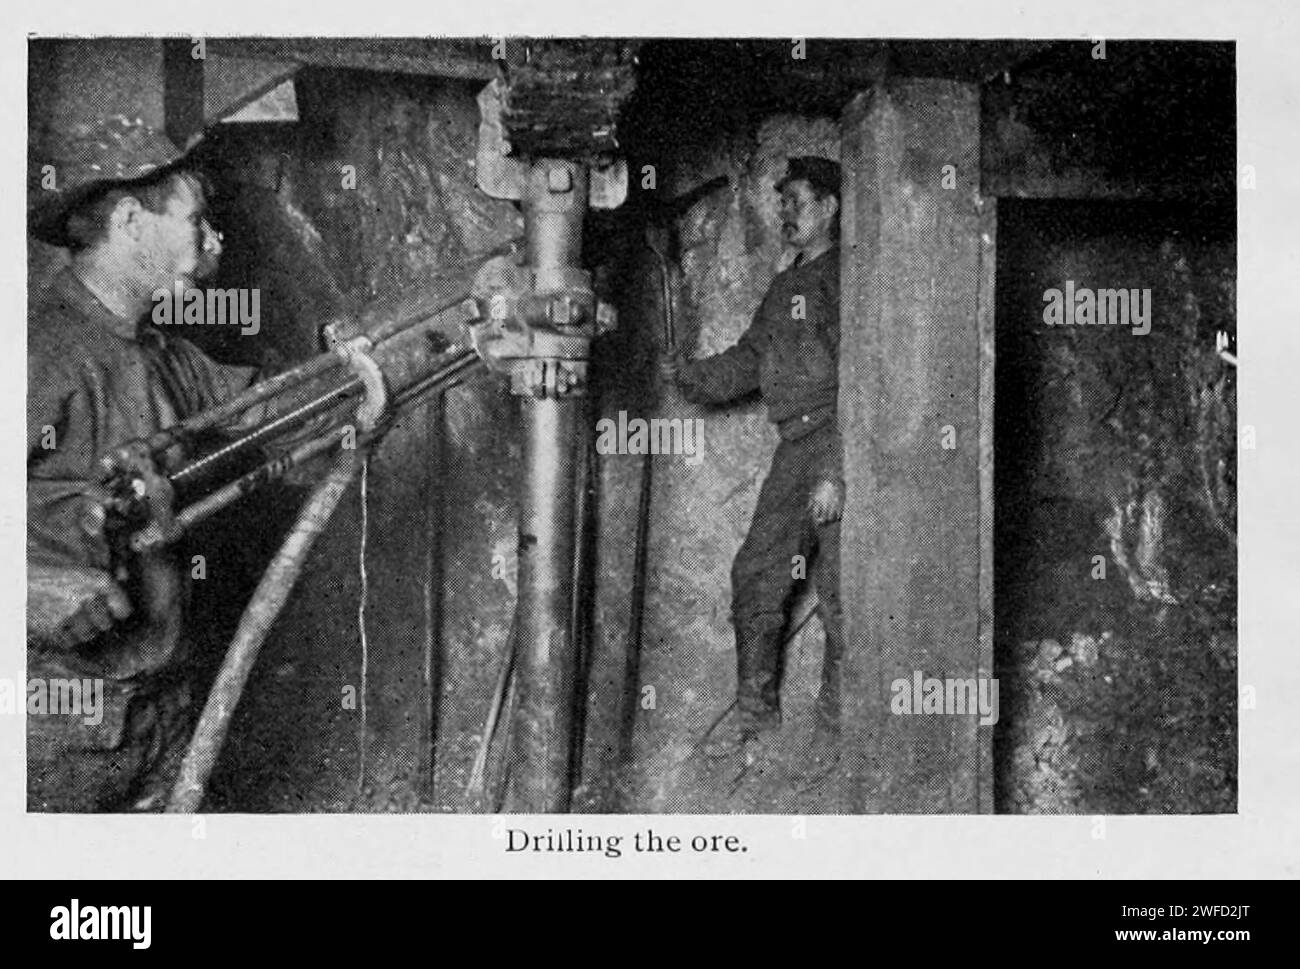 Drilling the Ore from the Article CHARACTERISTIC AMERICAN METAL MIMES. THE ANACONDA COPPER MINE AND WORKS., By Titus Ulke. from The Engineering Magazine Devoted to Industrial Progress Volume XI October 1897 The Engineering Magazine Co The Anaconda Copper Mining Company, known as the Amalgamated Copper Company from 1899 to 1915, was an American mining company headquartered in Butte, Montana. It was one of the largest trusts of the early 20th century and one of the largest mining companies in the world for much of the 20th century. Stock Photo